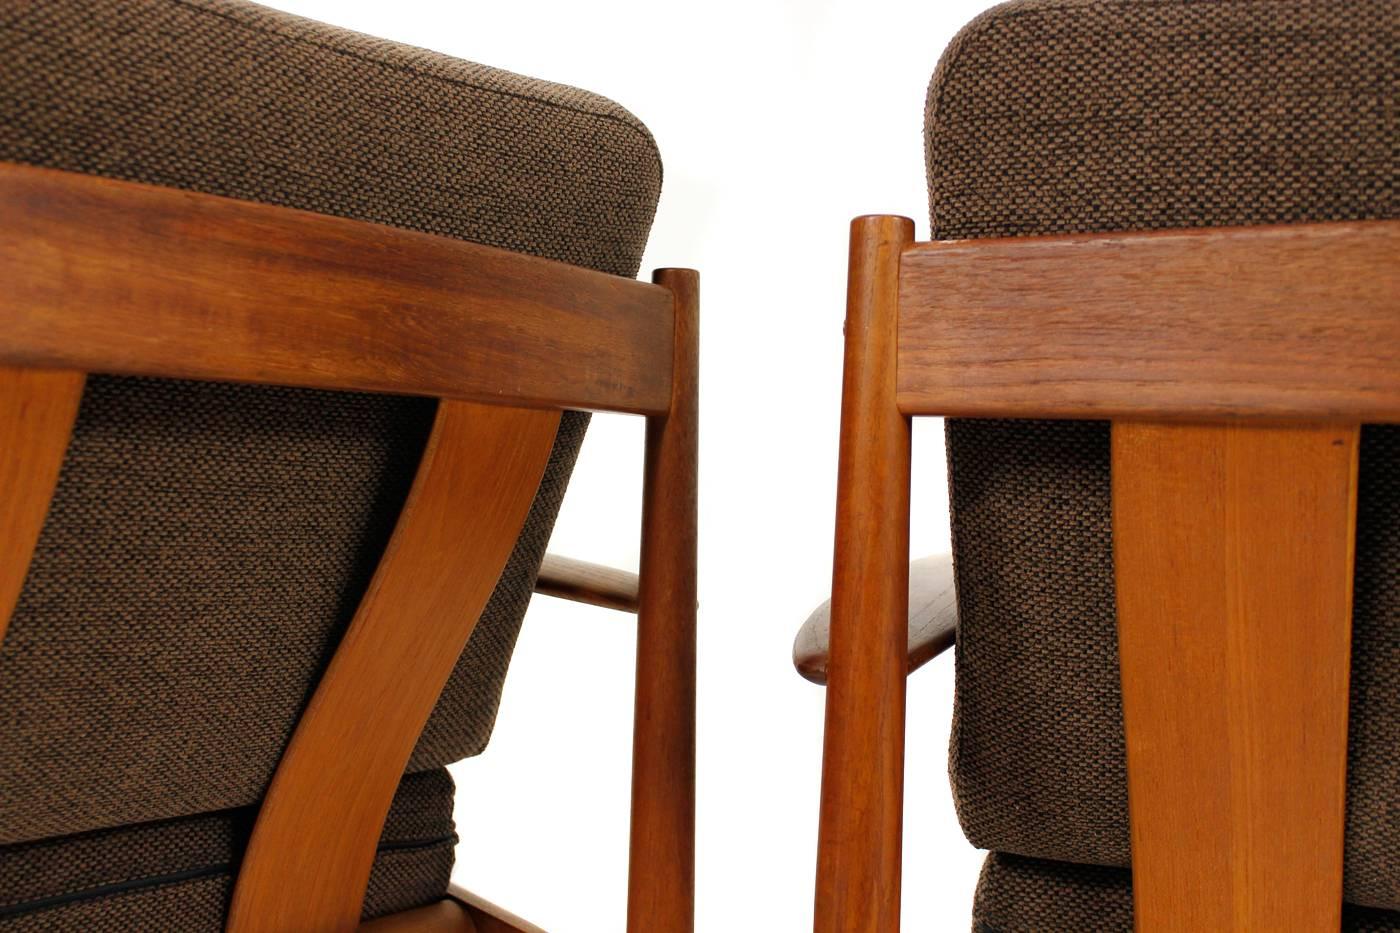 Beautiful set of two Grete Jalk teak easy chairs, Danish modern design. Original cushions, reupholstered and covered with woven fabric in a beautiful brown tone. Produced by France & Son Denmark.